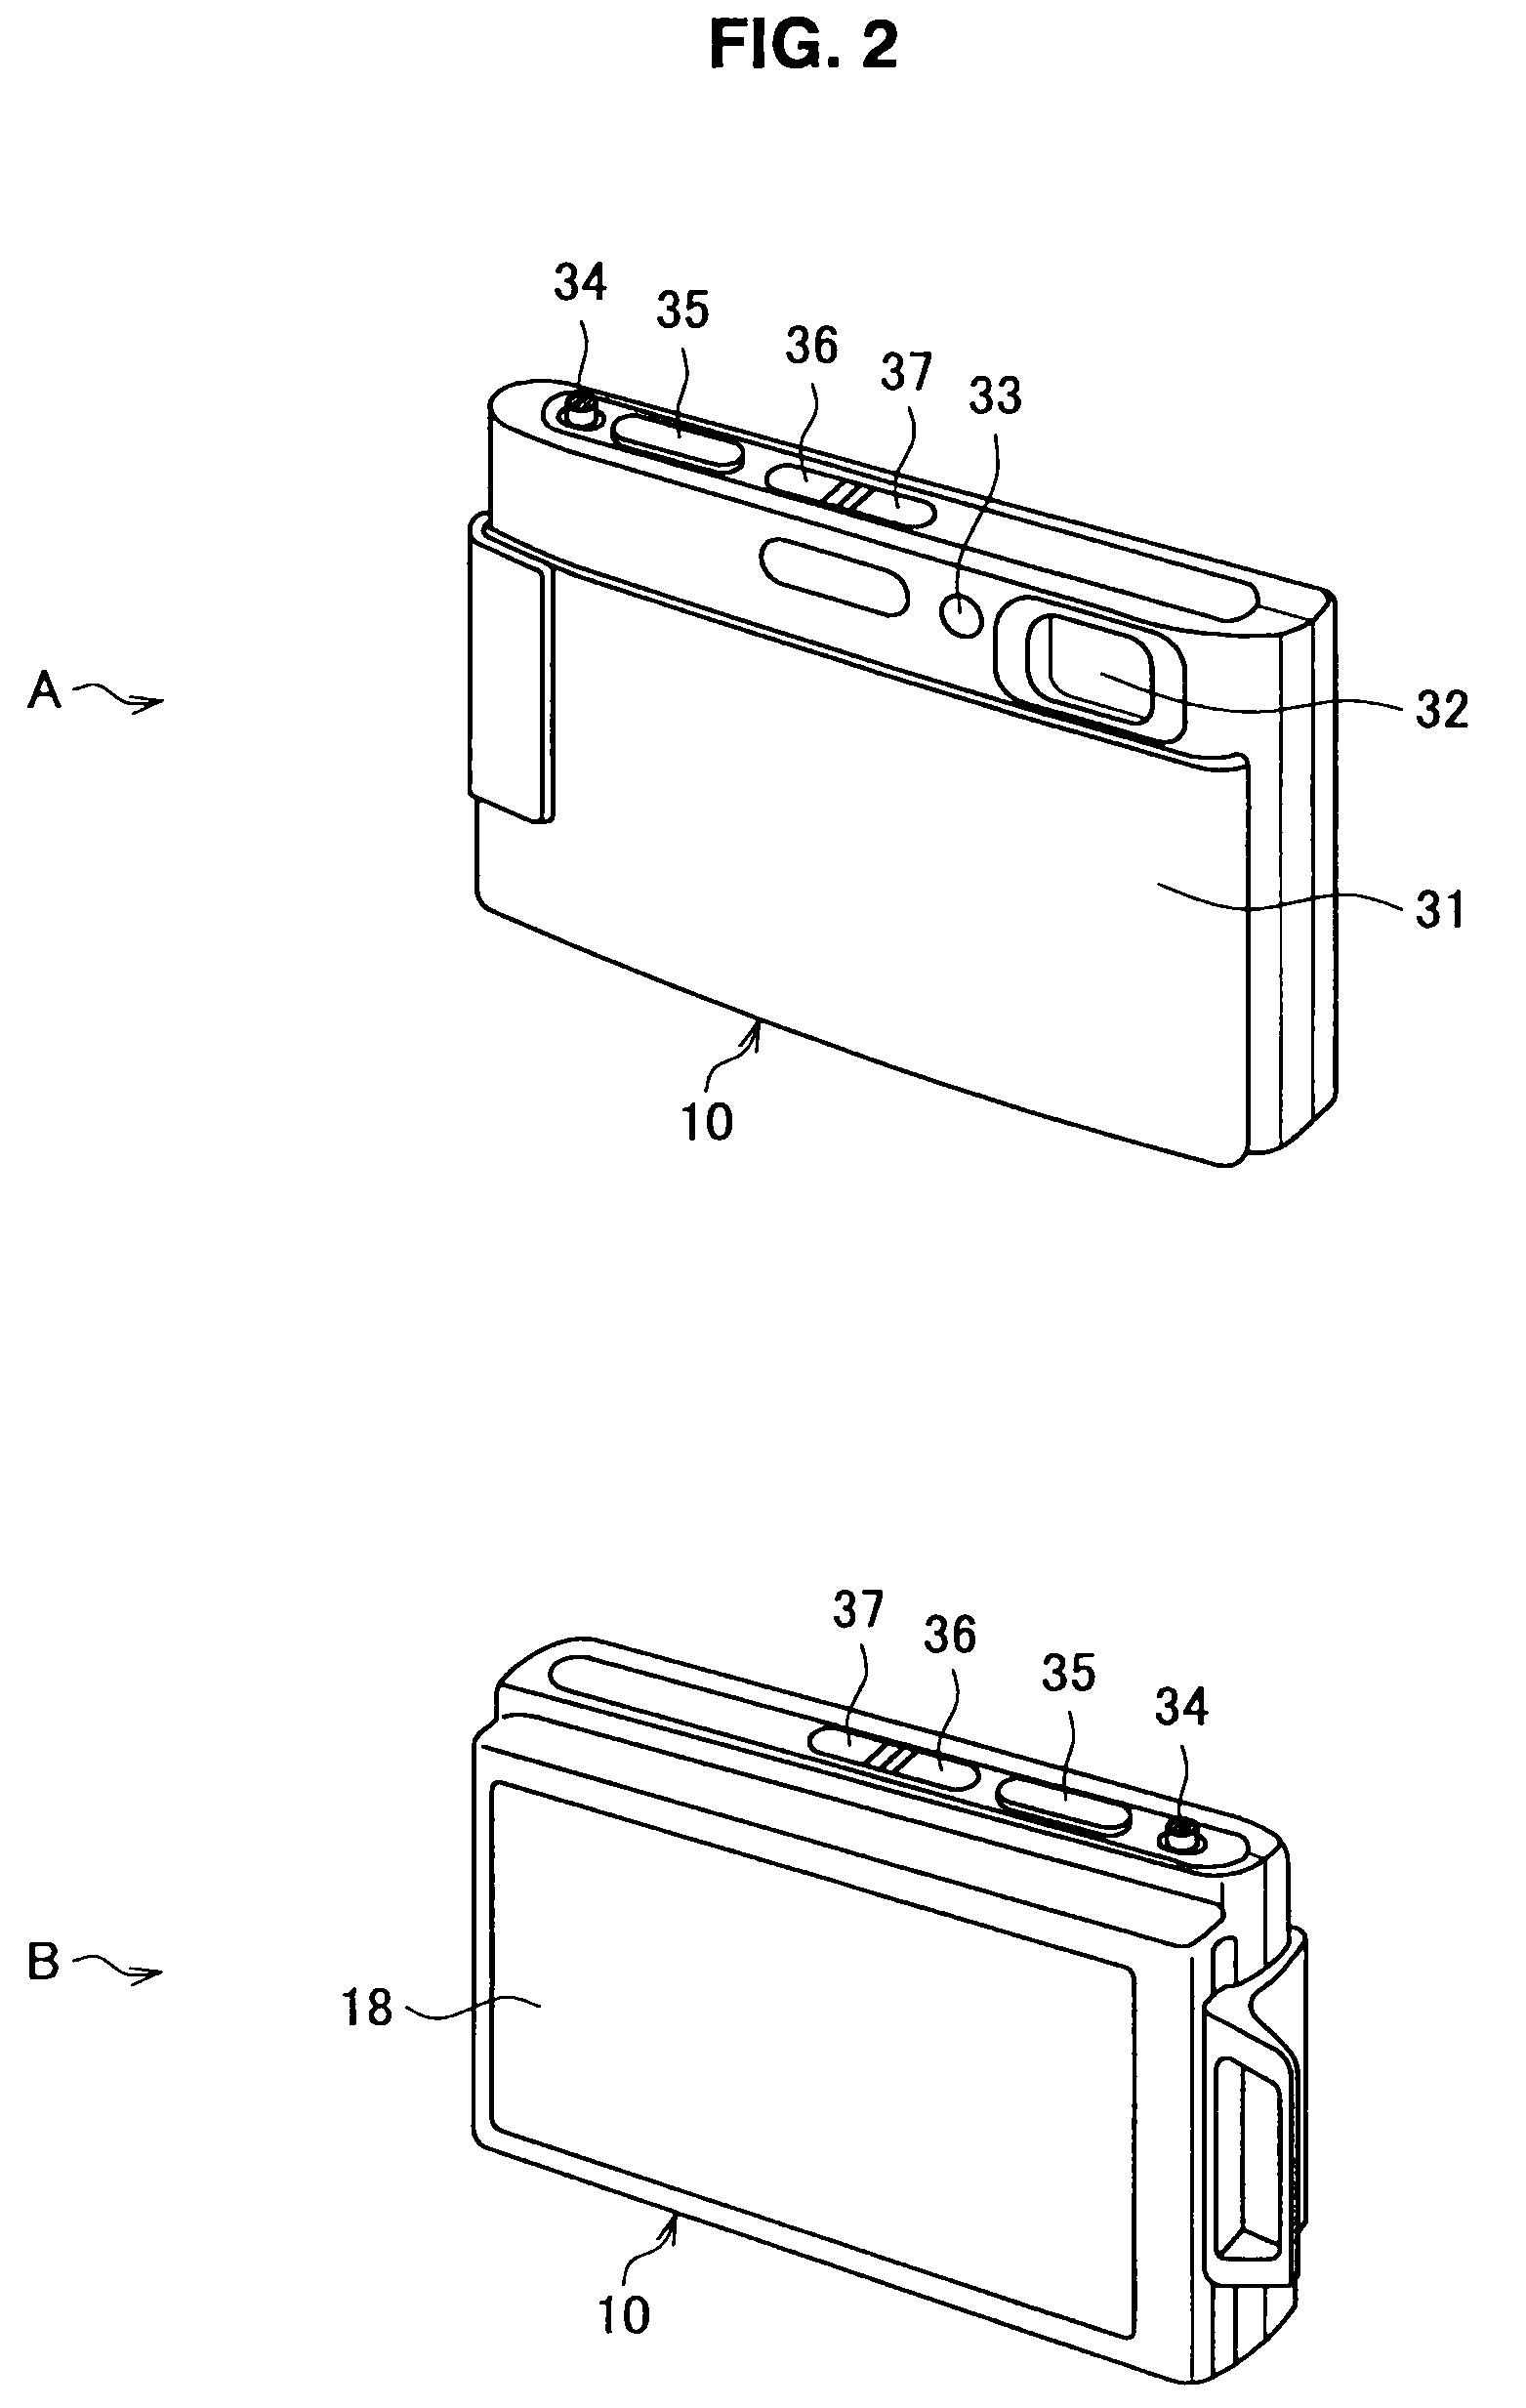 Information processing device, display method and program